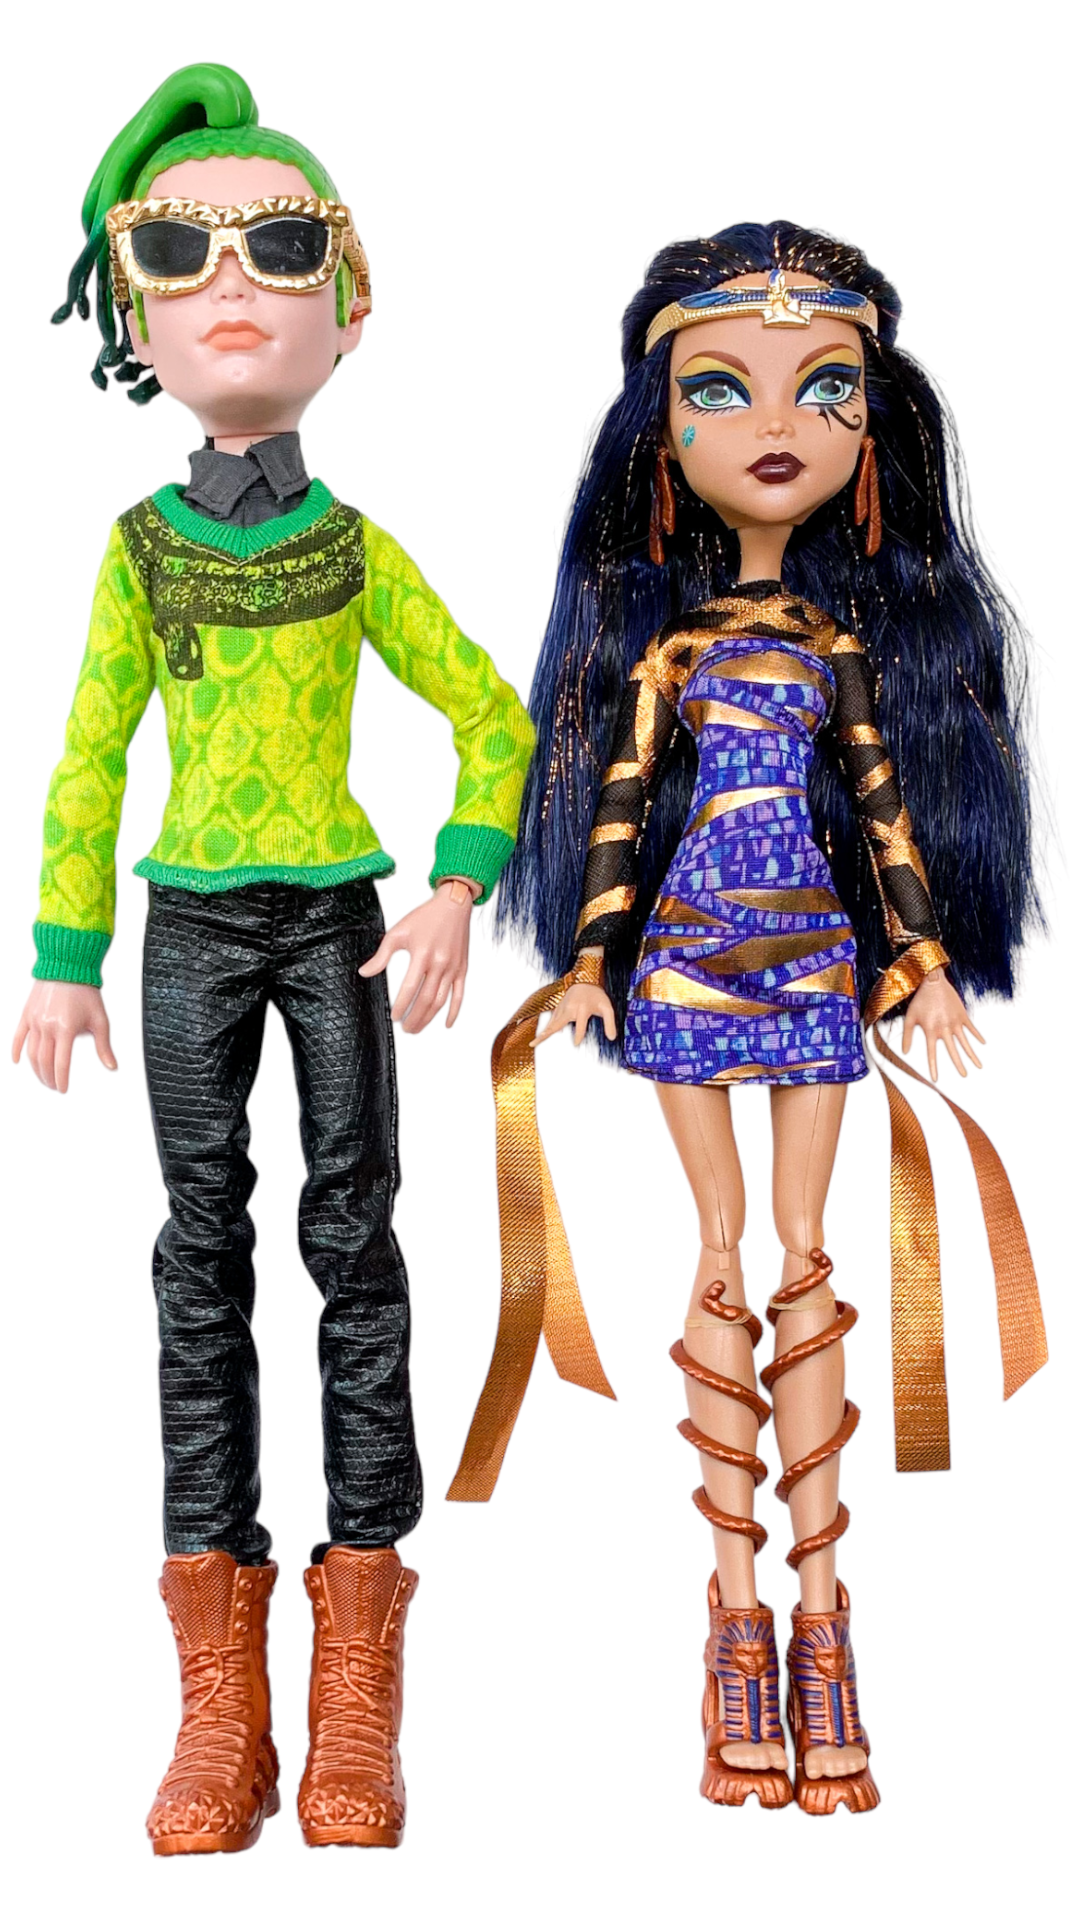  Mattel Monster High Boo York, Boo York Comet-Crossed Couple Cleo  de Nile and Deuce Gorgon Doll, 2-Pack (Discontinued by manufacturer) : Toys  & Games